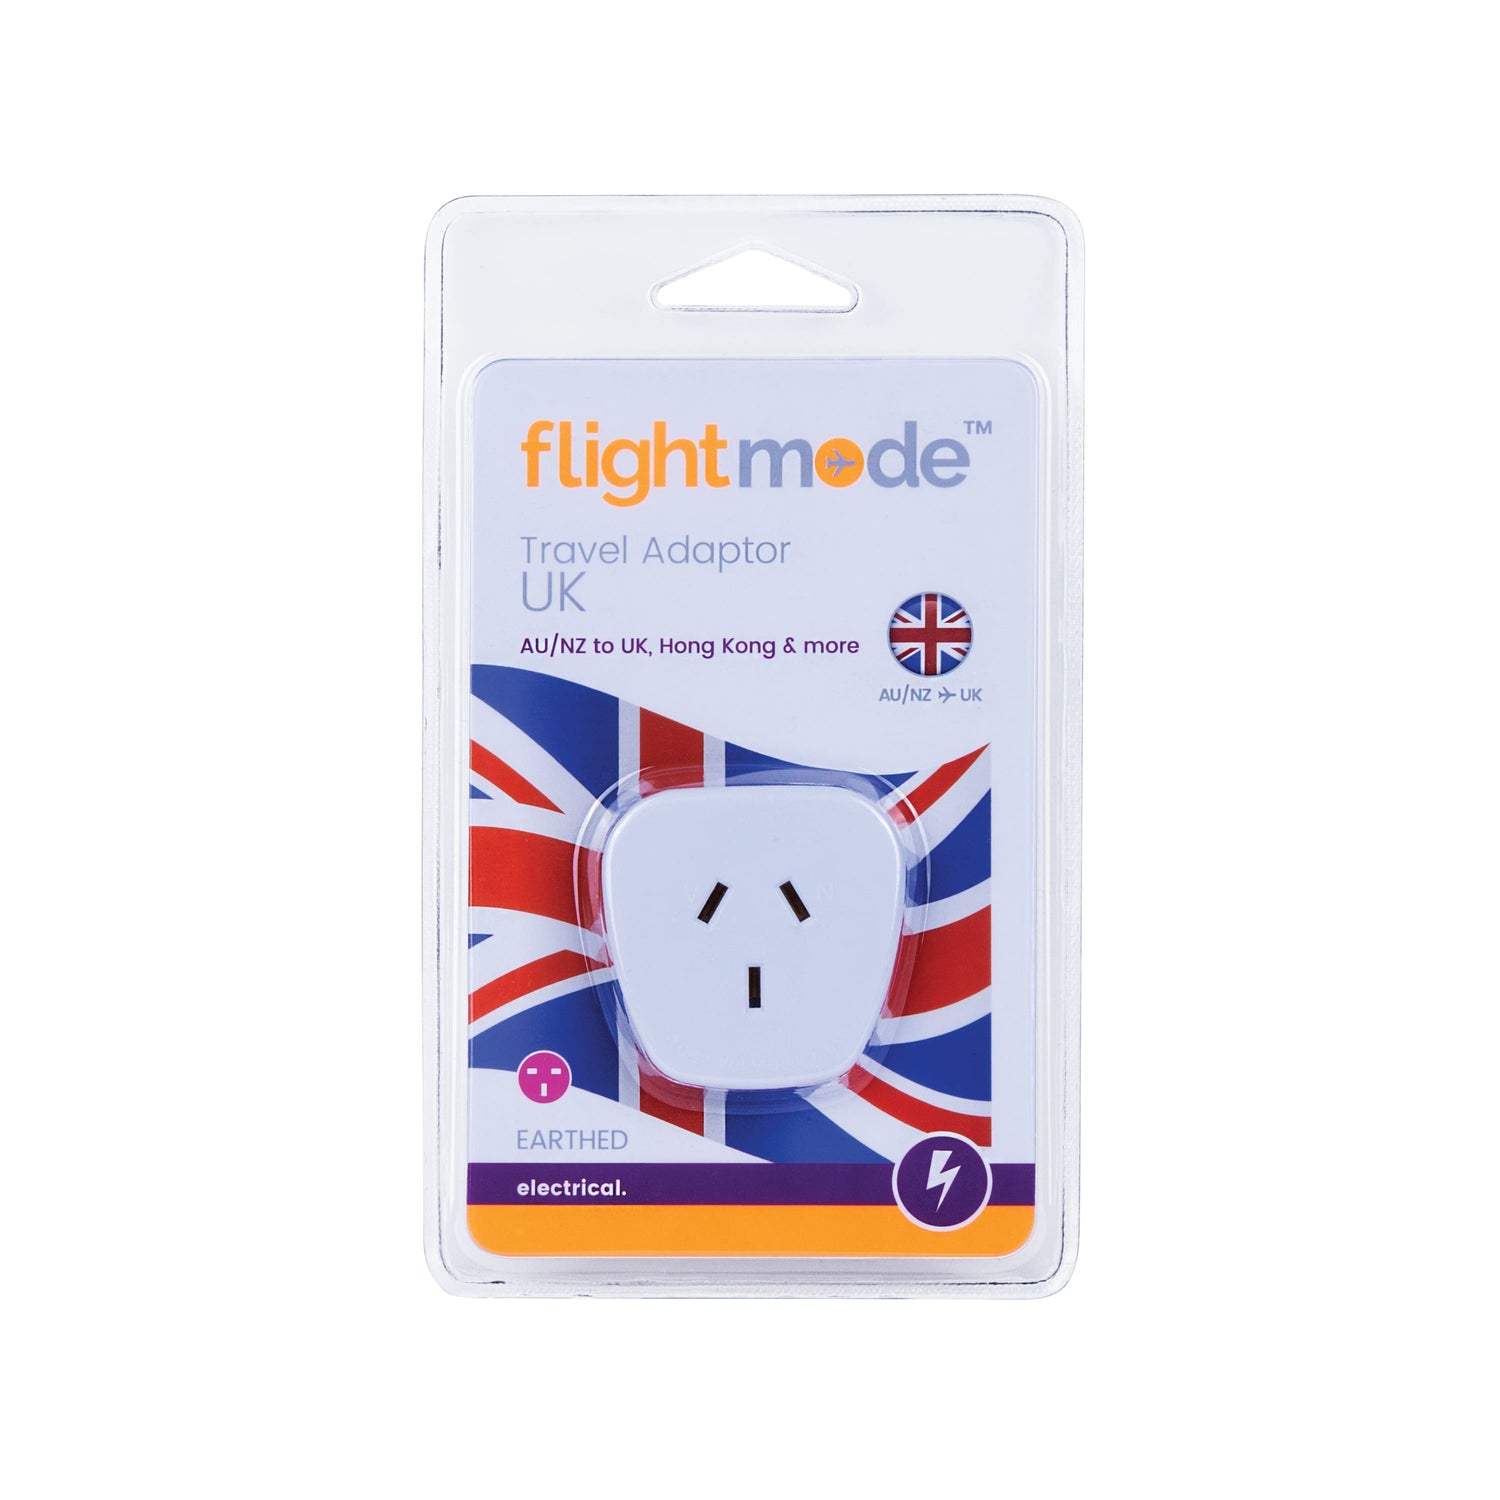 Flightmode Outbound UK Adaptor (Hong Kong/UK) Type G - Adaptors do not convert voltage or frequency - please check the supply voltage and frequency and the voltage and frequency required to operate your appliance. If either of these differ, an appropriate transformer must be used.